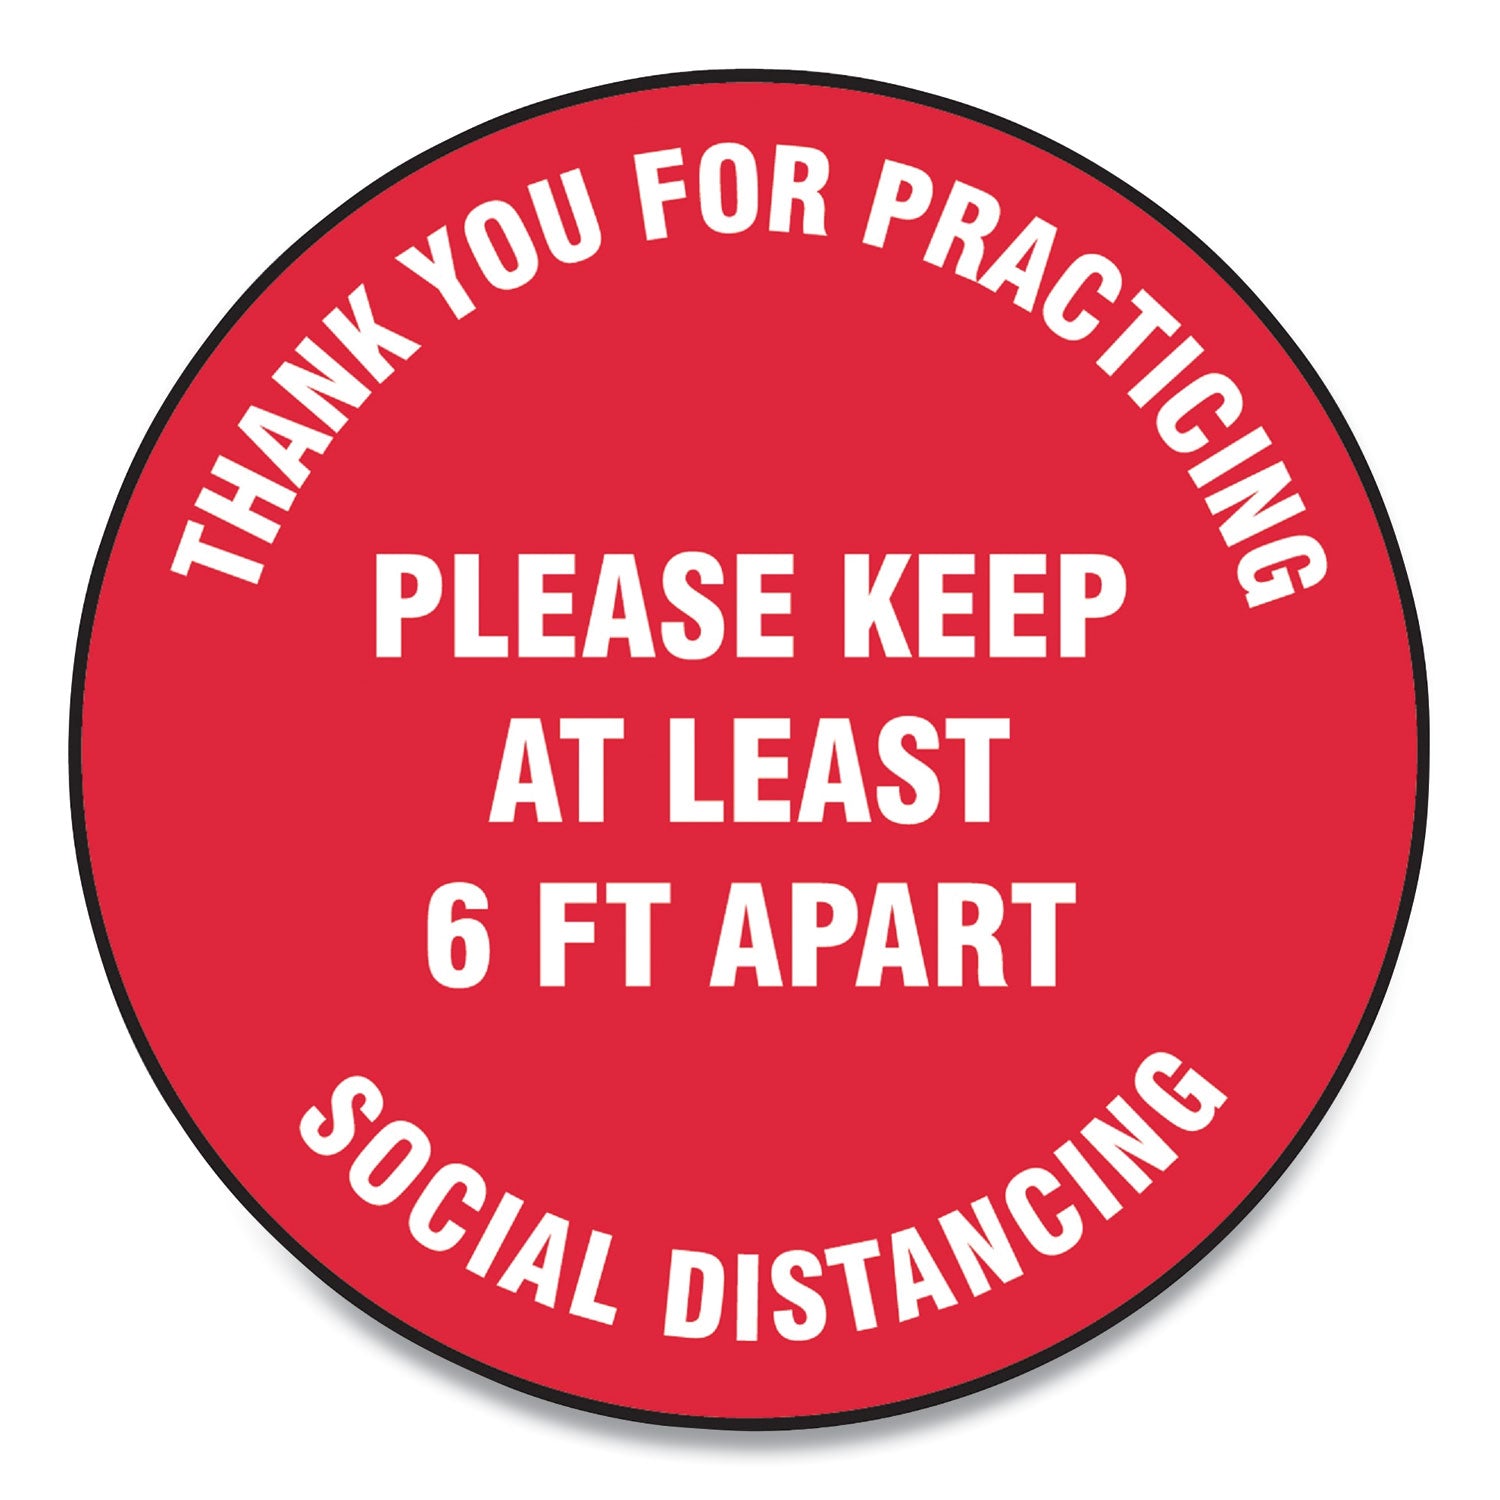 slip-gard-floor-signs-17-circle-thank-you-for-practicing-social-distancing-please-keep-at-least-6-ft-apart-red-25-pack_gn1mfs423esp - 1